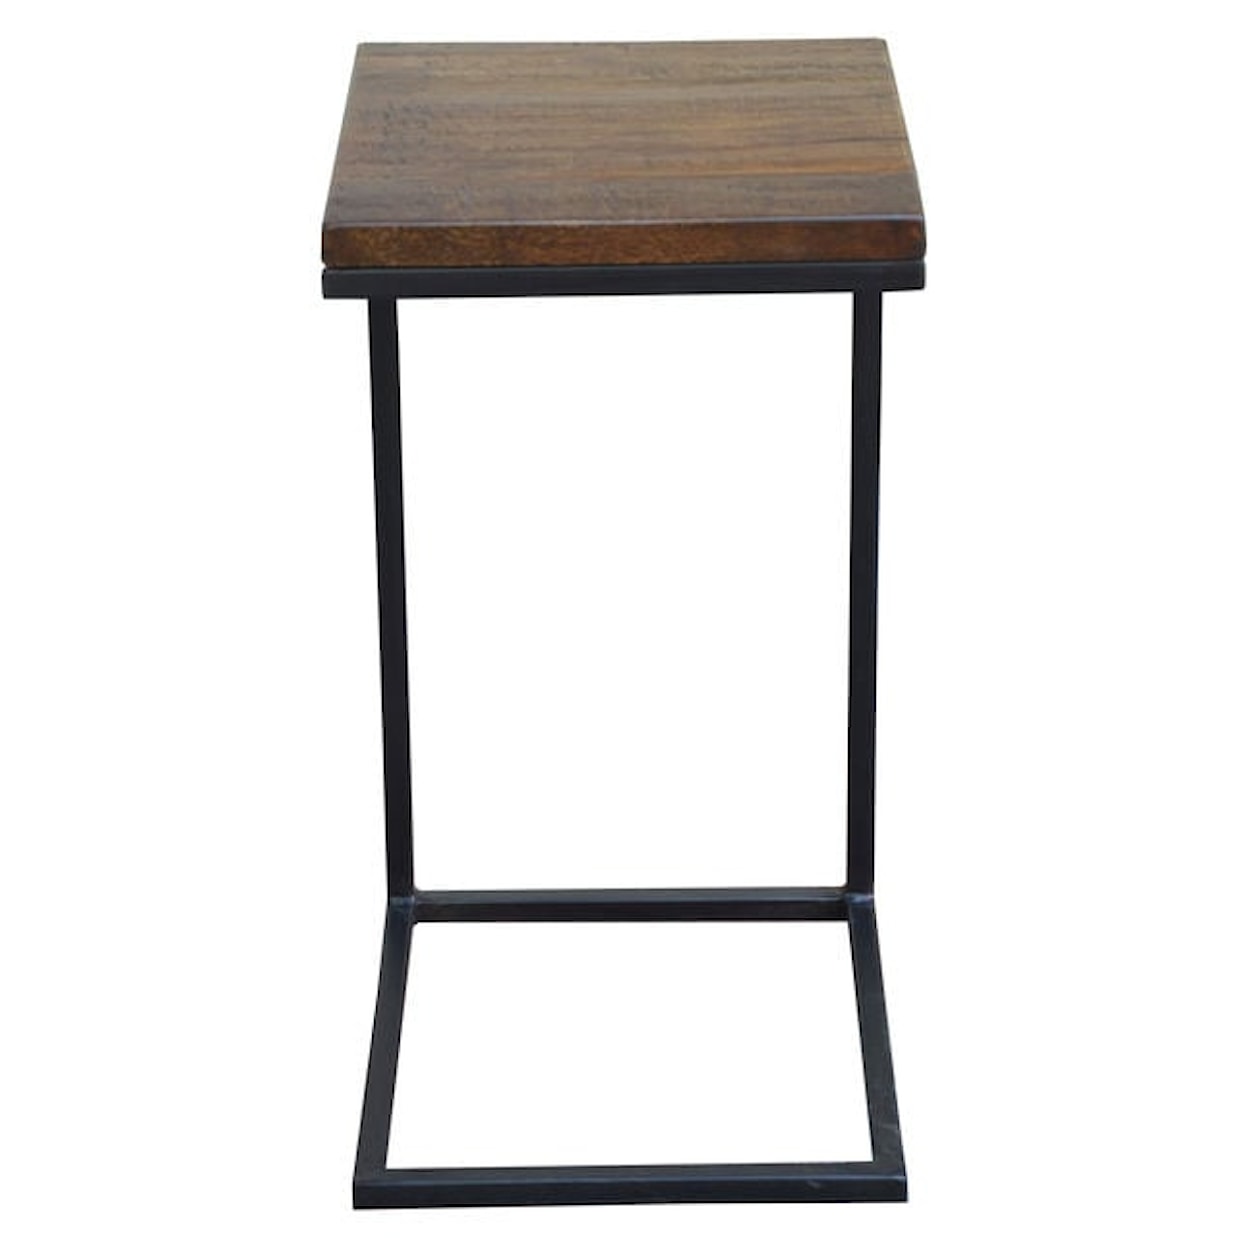 Dovetail Furniture Casegood Accent Rima Side Table